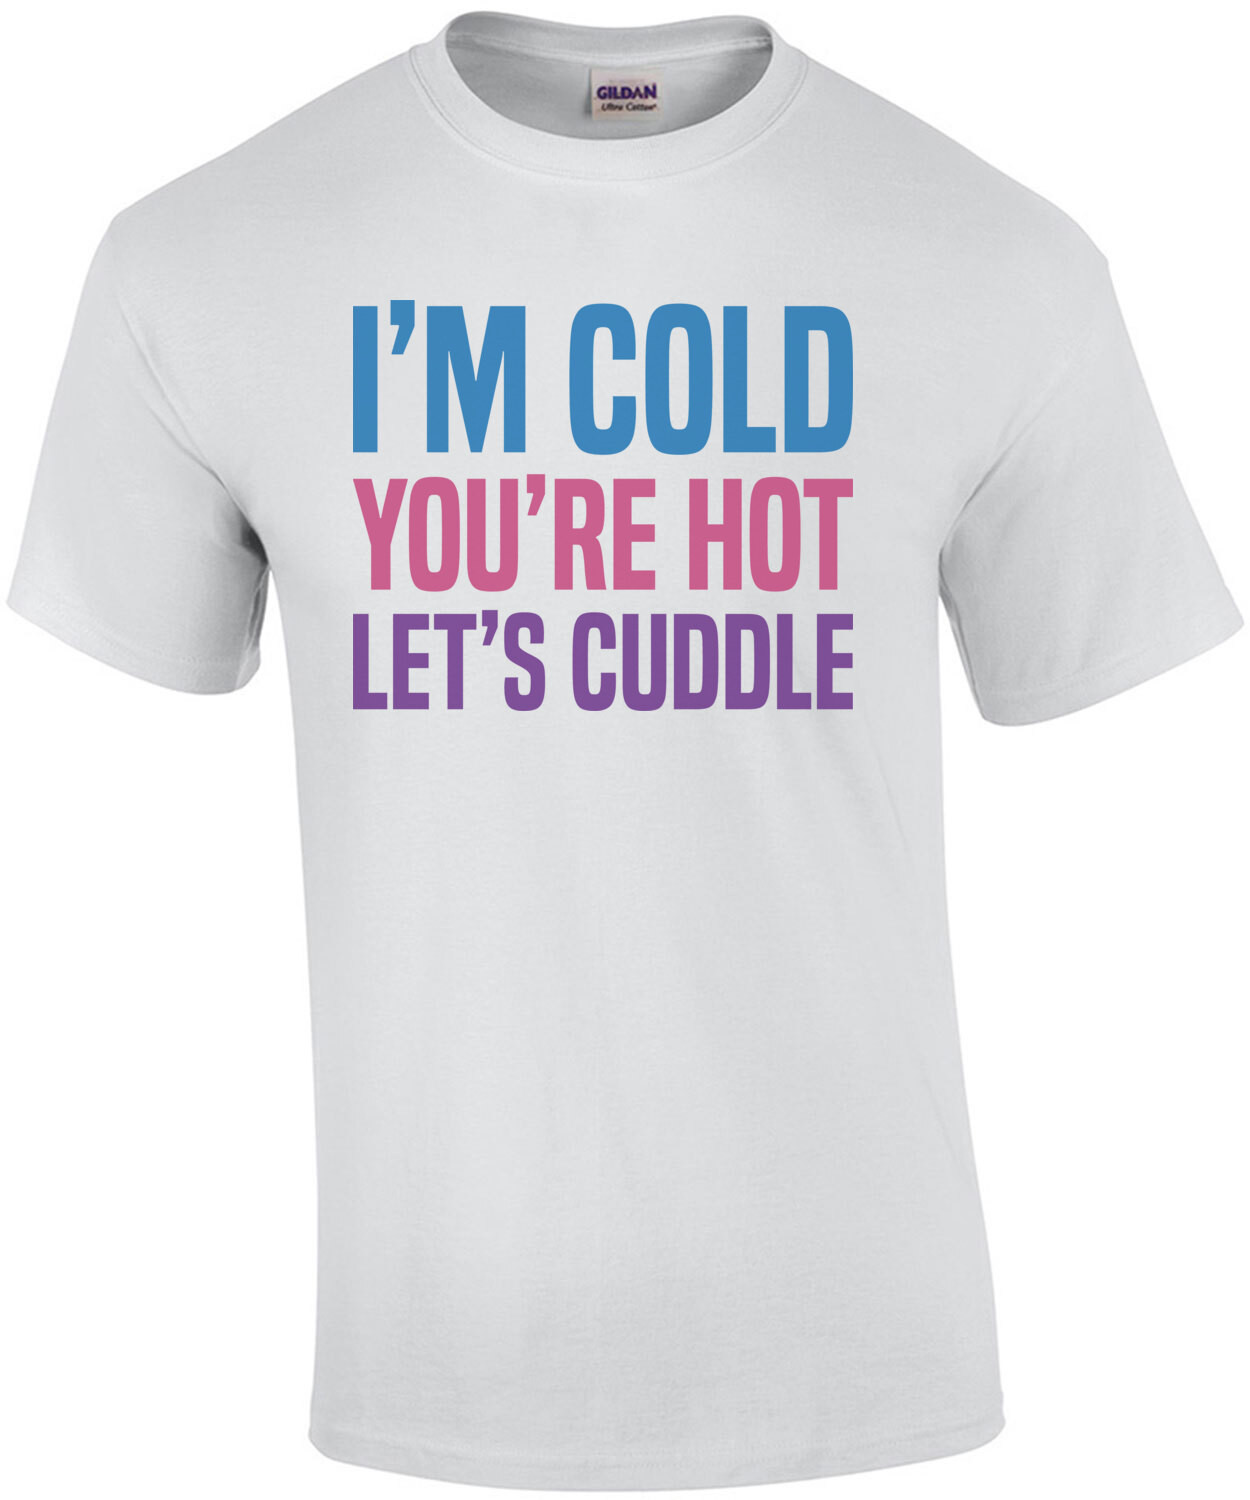 I'm cold you're hot let's cuddle - funny t-shirt